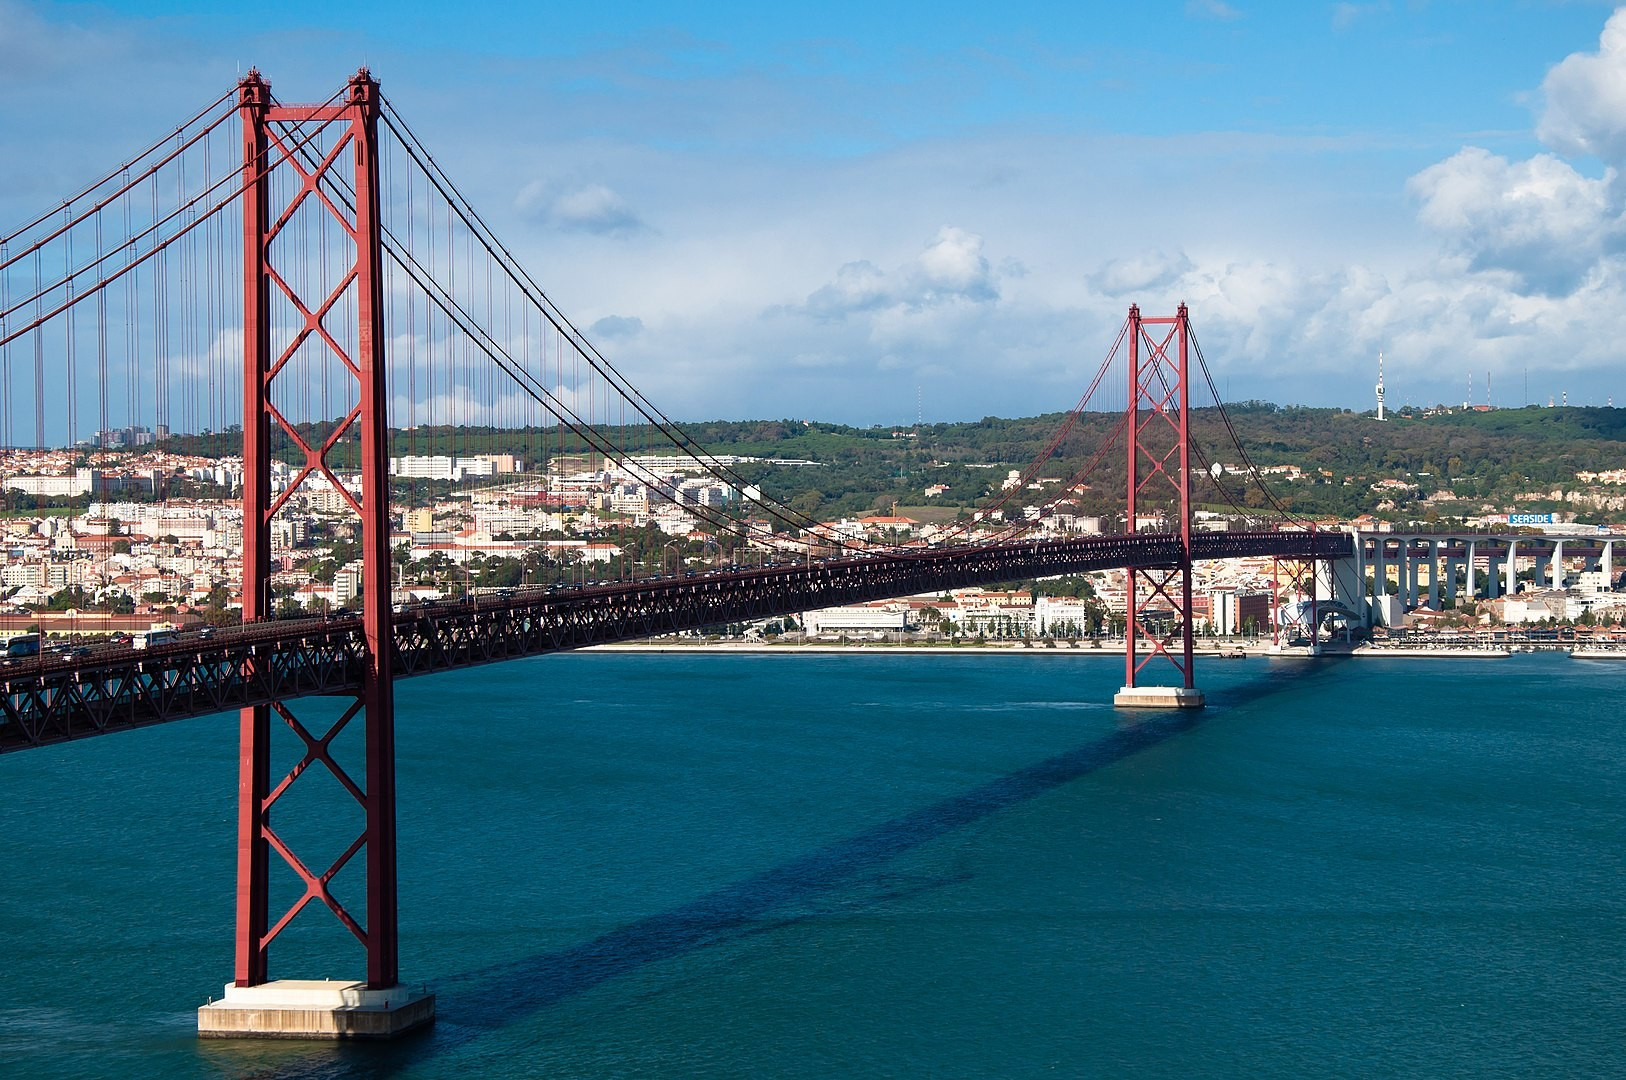 By Matt Perich from Lausanne, Switzerland - Lisbon Bridge, CC BY 2.0, https://commons.wikimedia.org/w/index.php?curid=14767824